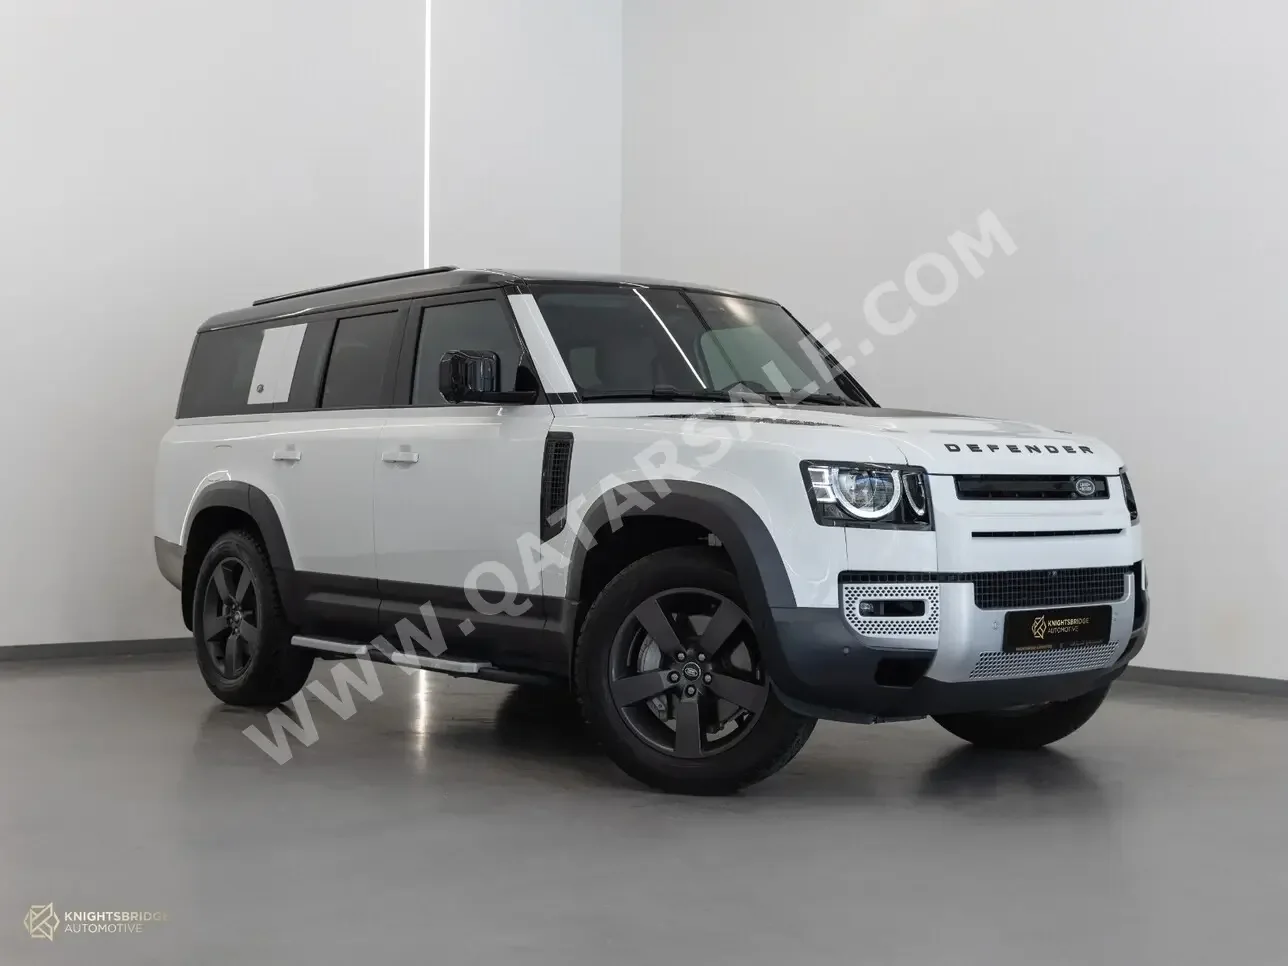  Land Rover  Defender  130 HSE  2023  Automatic  13,100 Km  6 Cylinder  Four Wheel Drive (4WD)  SUV  White  With Warranty